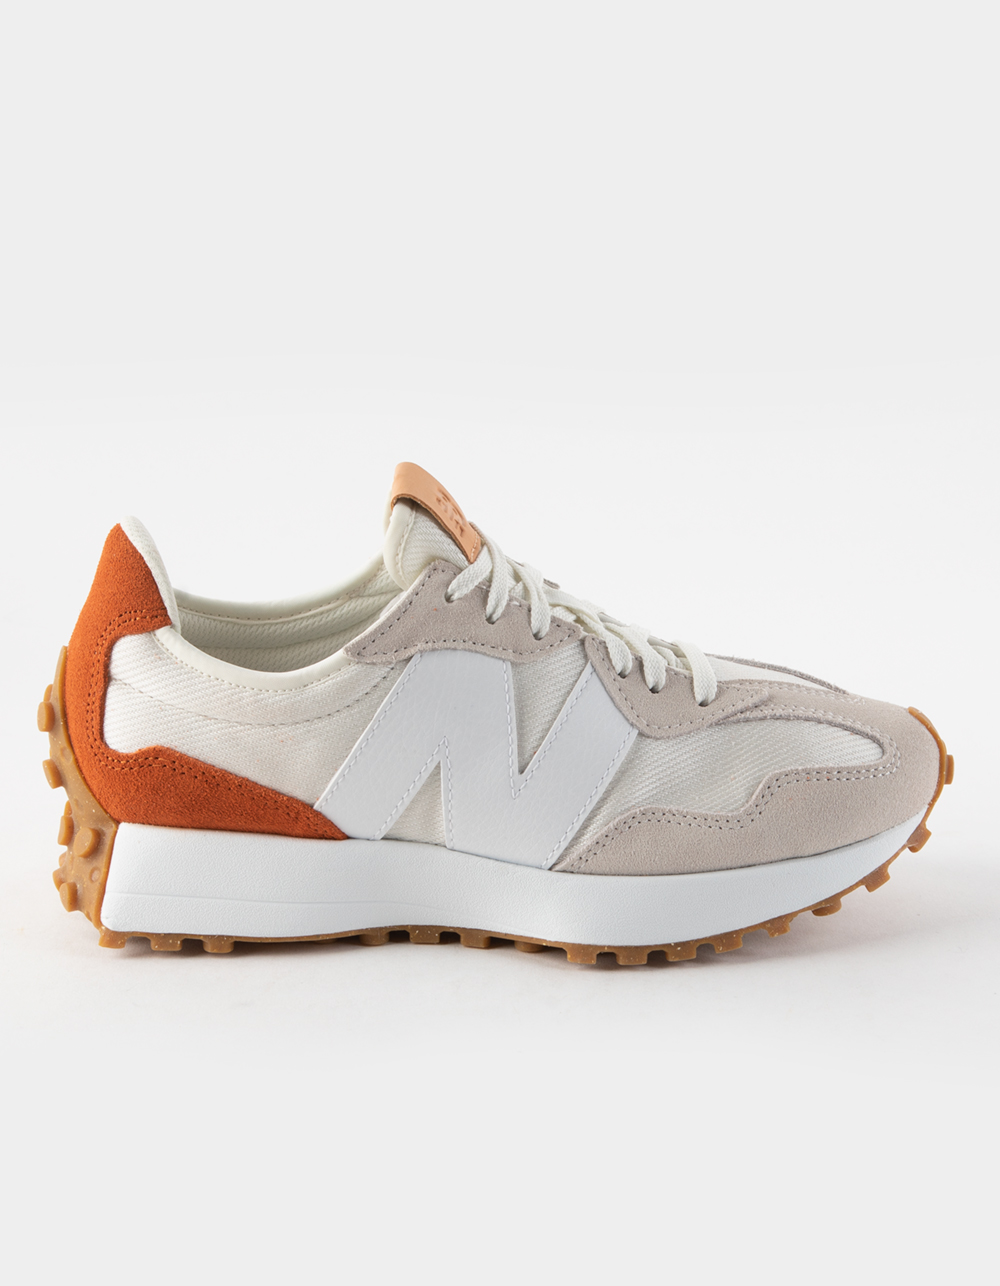 NEW BALANCE 327 Womens Shoes - IVORY | Tillys